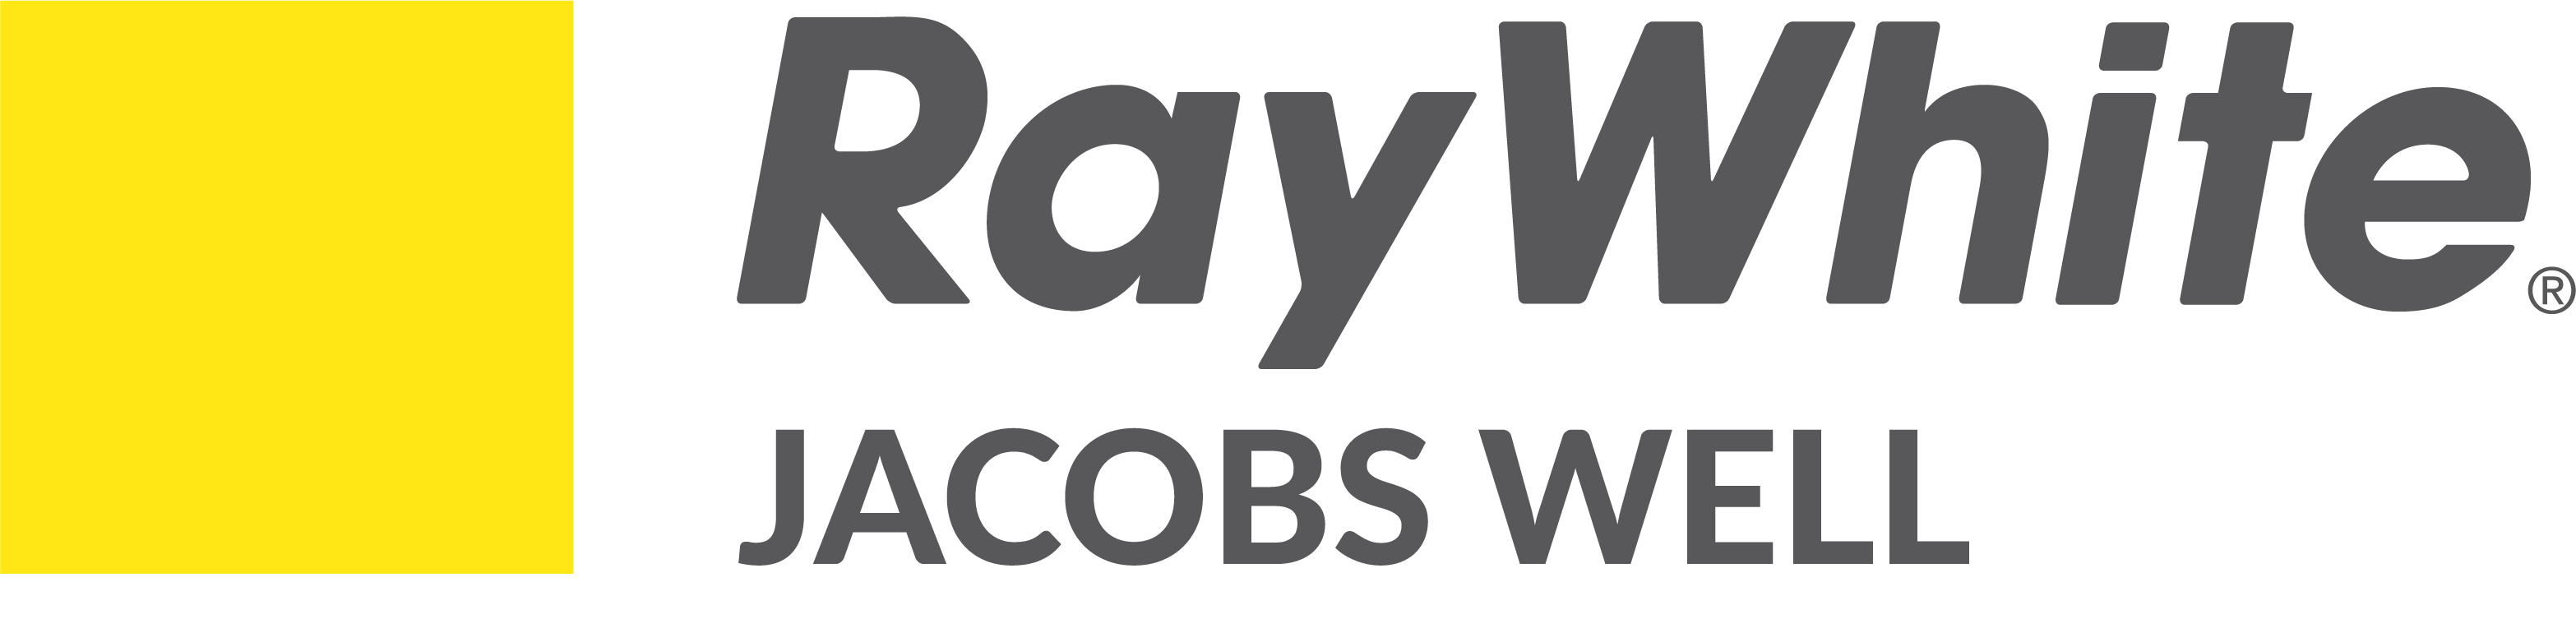 Ray White JACOBS WELL Logo.png